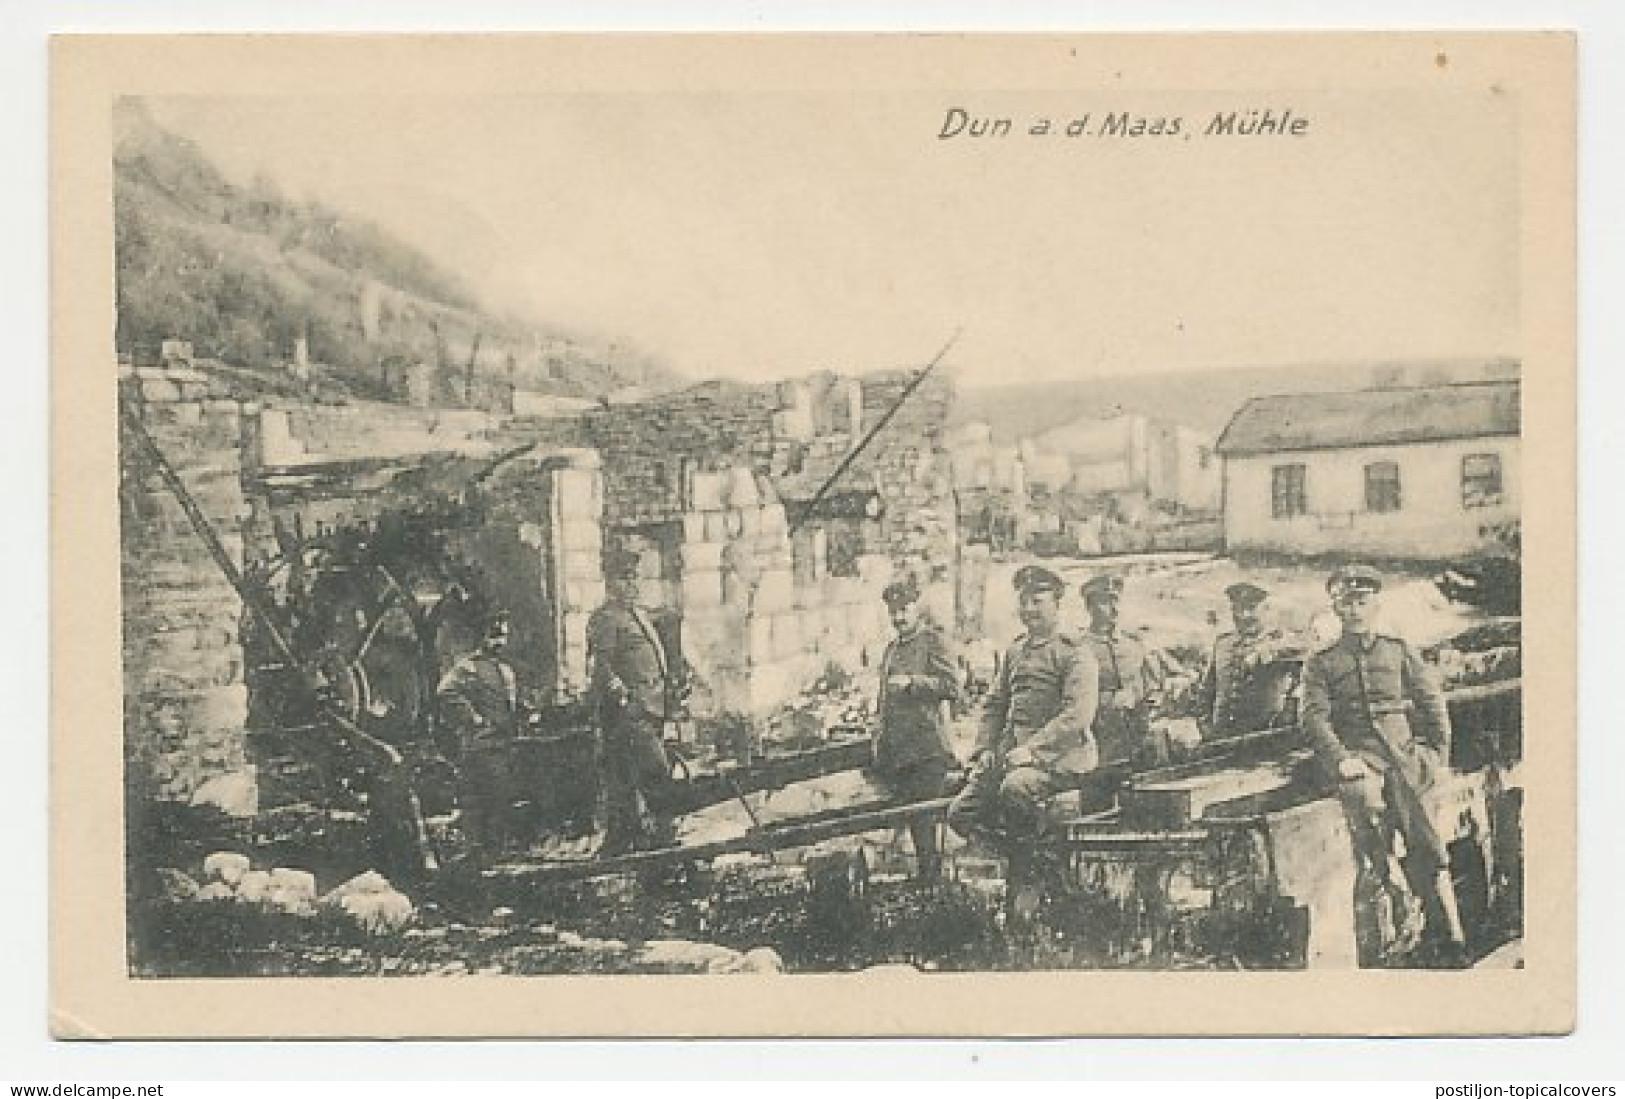 Fieldpost Postcard Germany / France 1916 Soldiers - Dun Sur Meuse - WWI - WO1